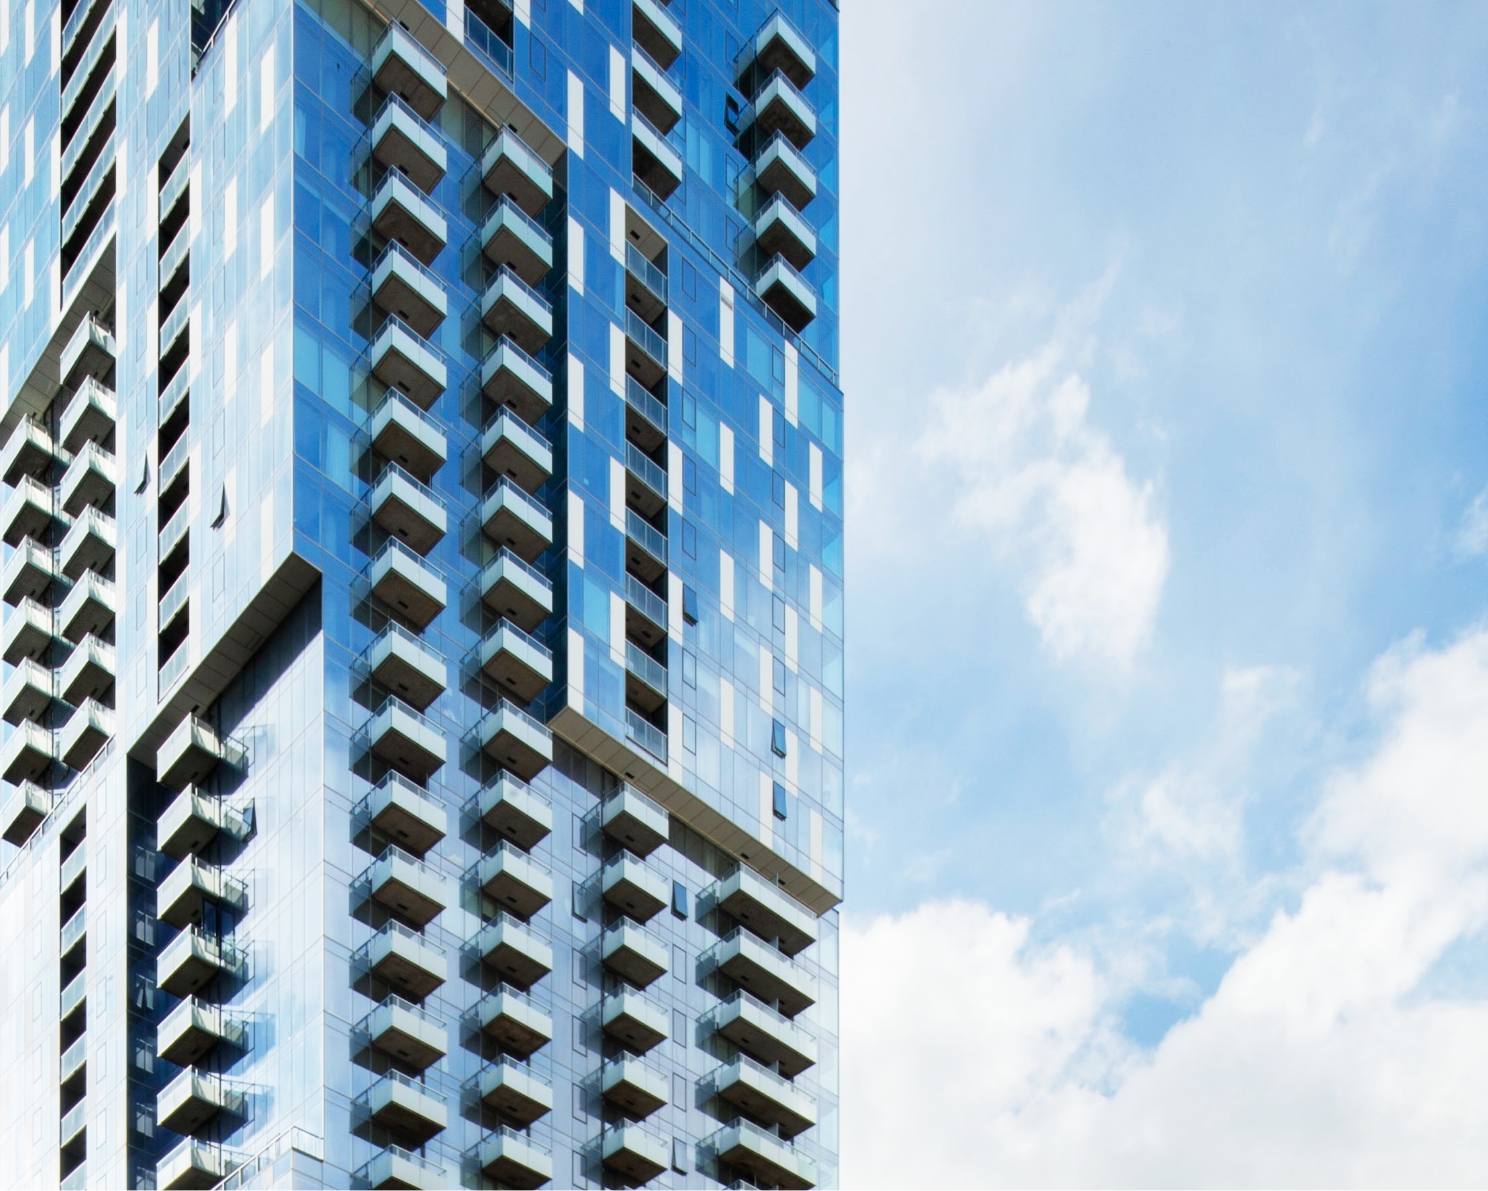 The blue façade of a new condo tower located in the Ville-Marie borough